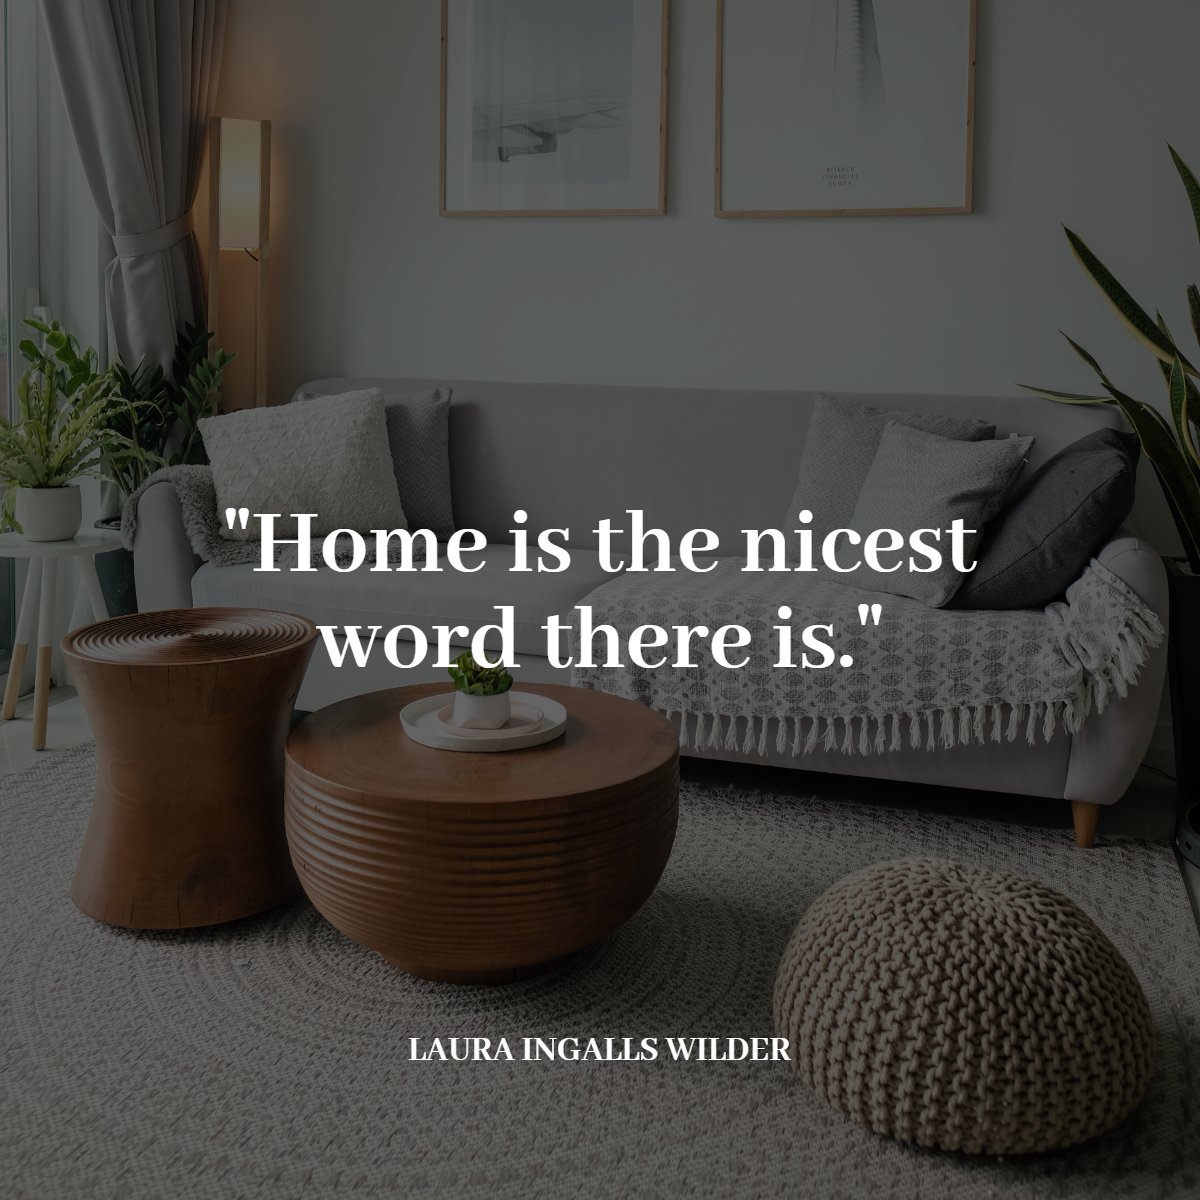 'Home is the nicest word there is.' 📖
― Laura Ingalls Wilder 

#home #quote #word #family #requotes #quoteoftheday #lauraingallswilder
 #riscosells #theriscogroup #kwmainline #Uptownliving